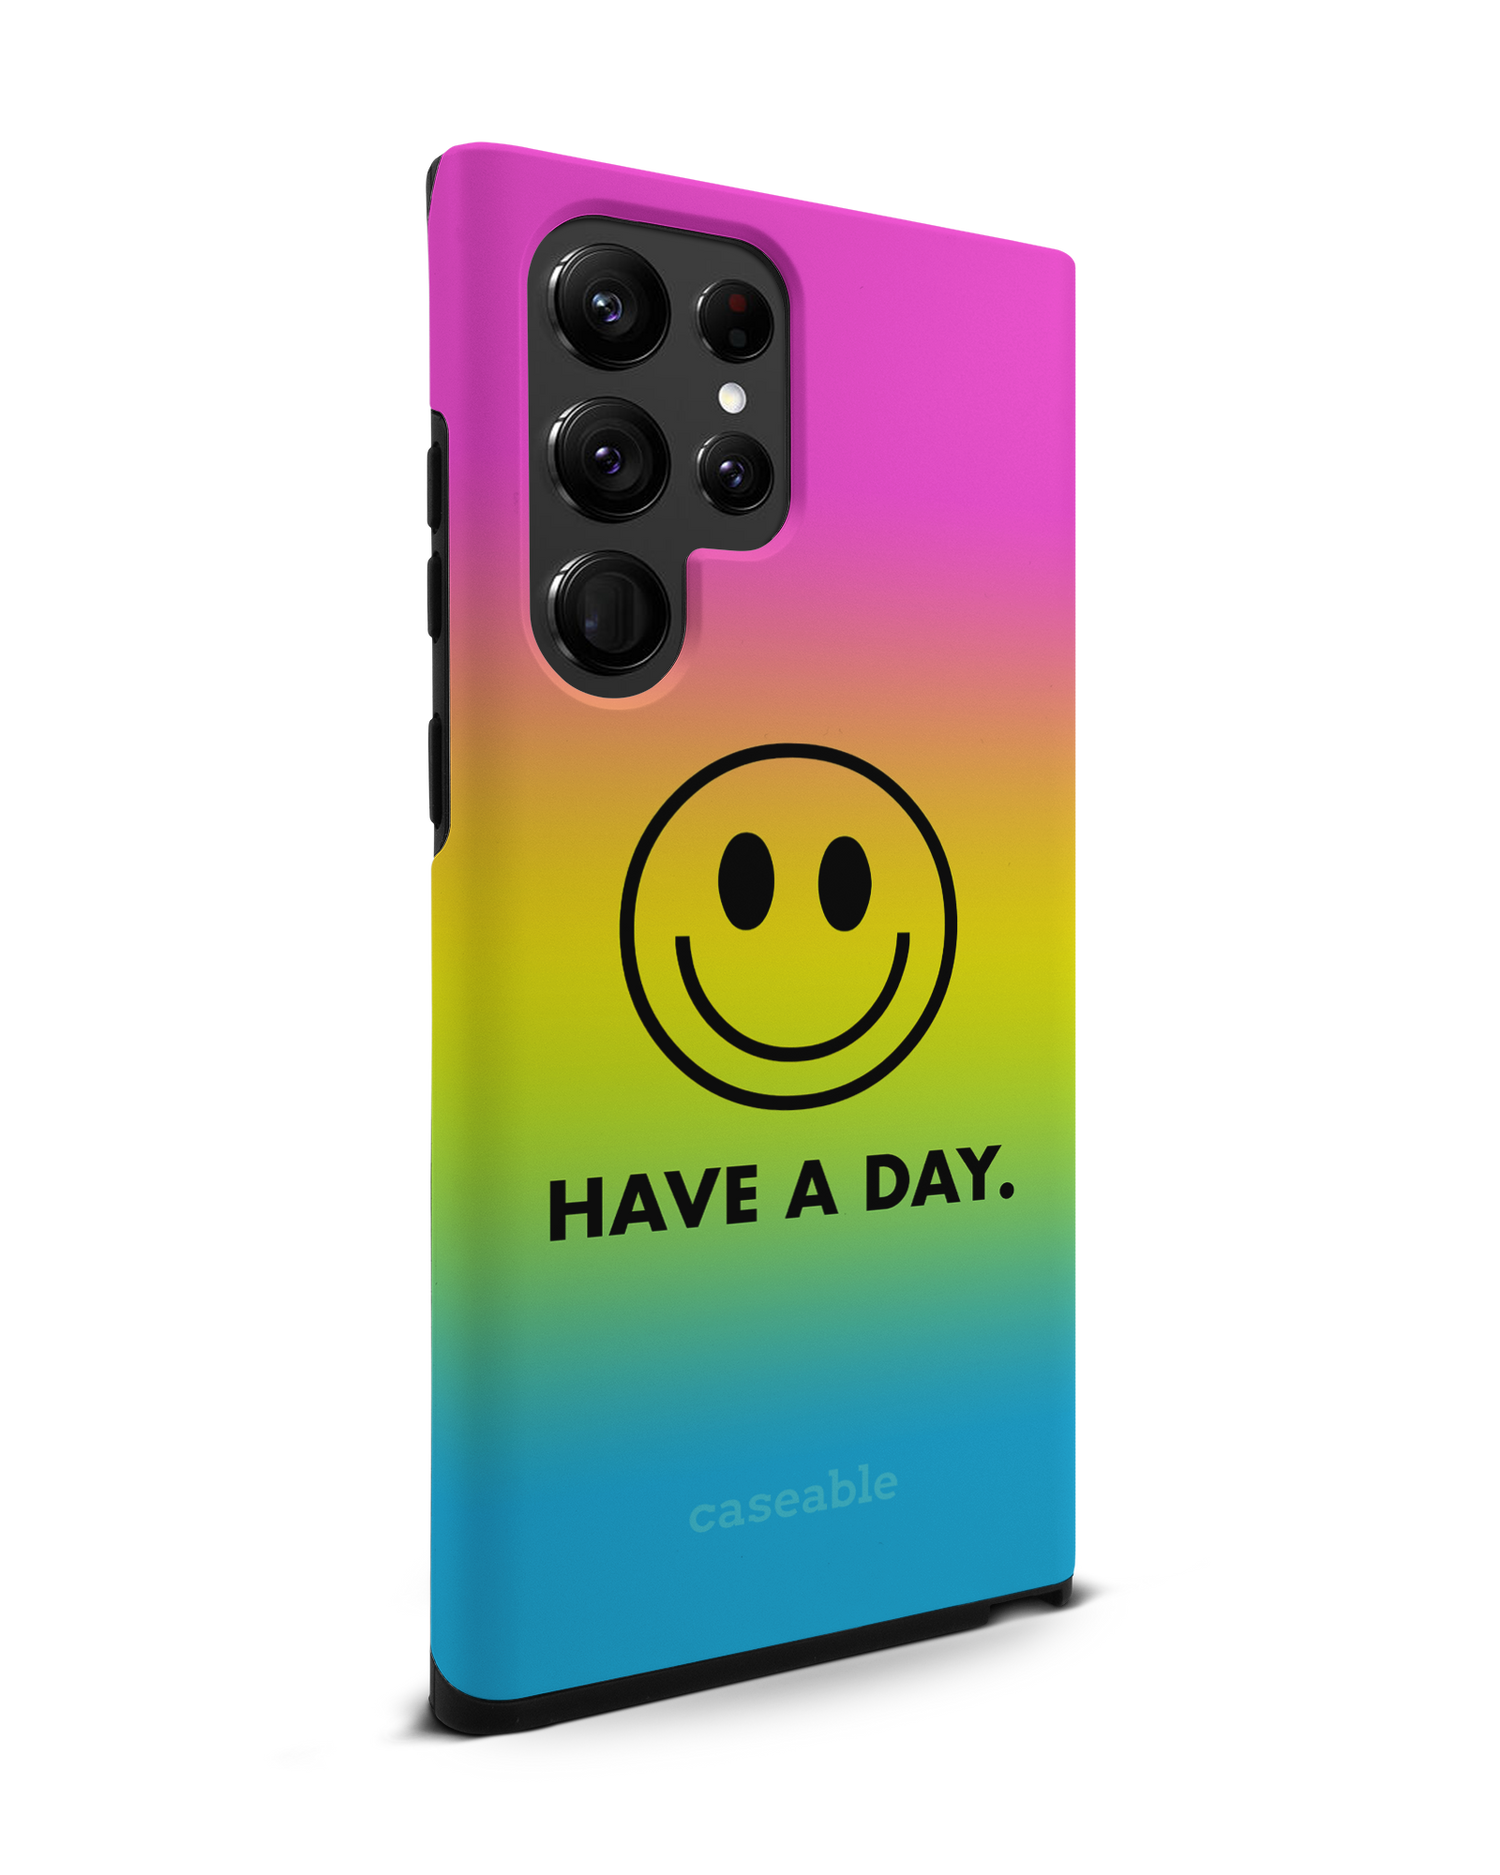 Have A Day Premium Phone Case Samsung Galaxy S22 Ultra 5G: View from the left side